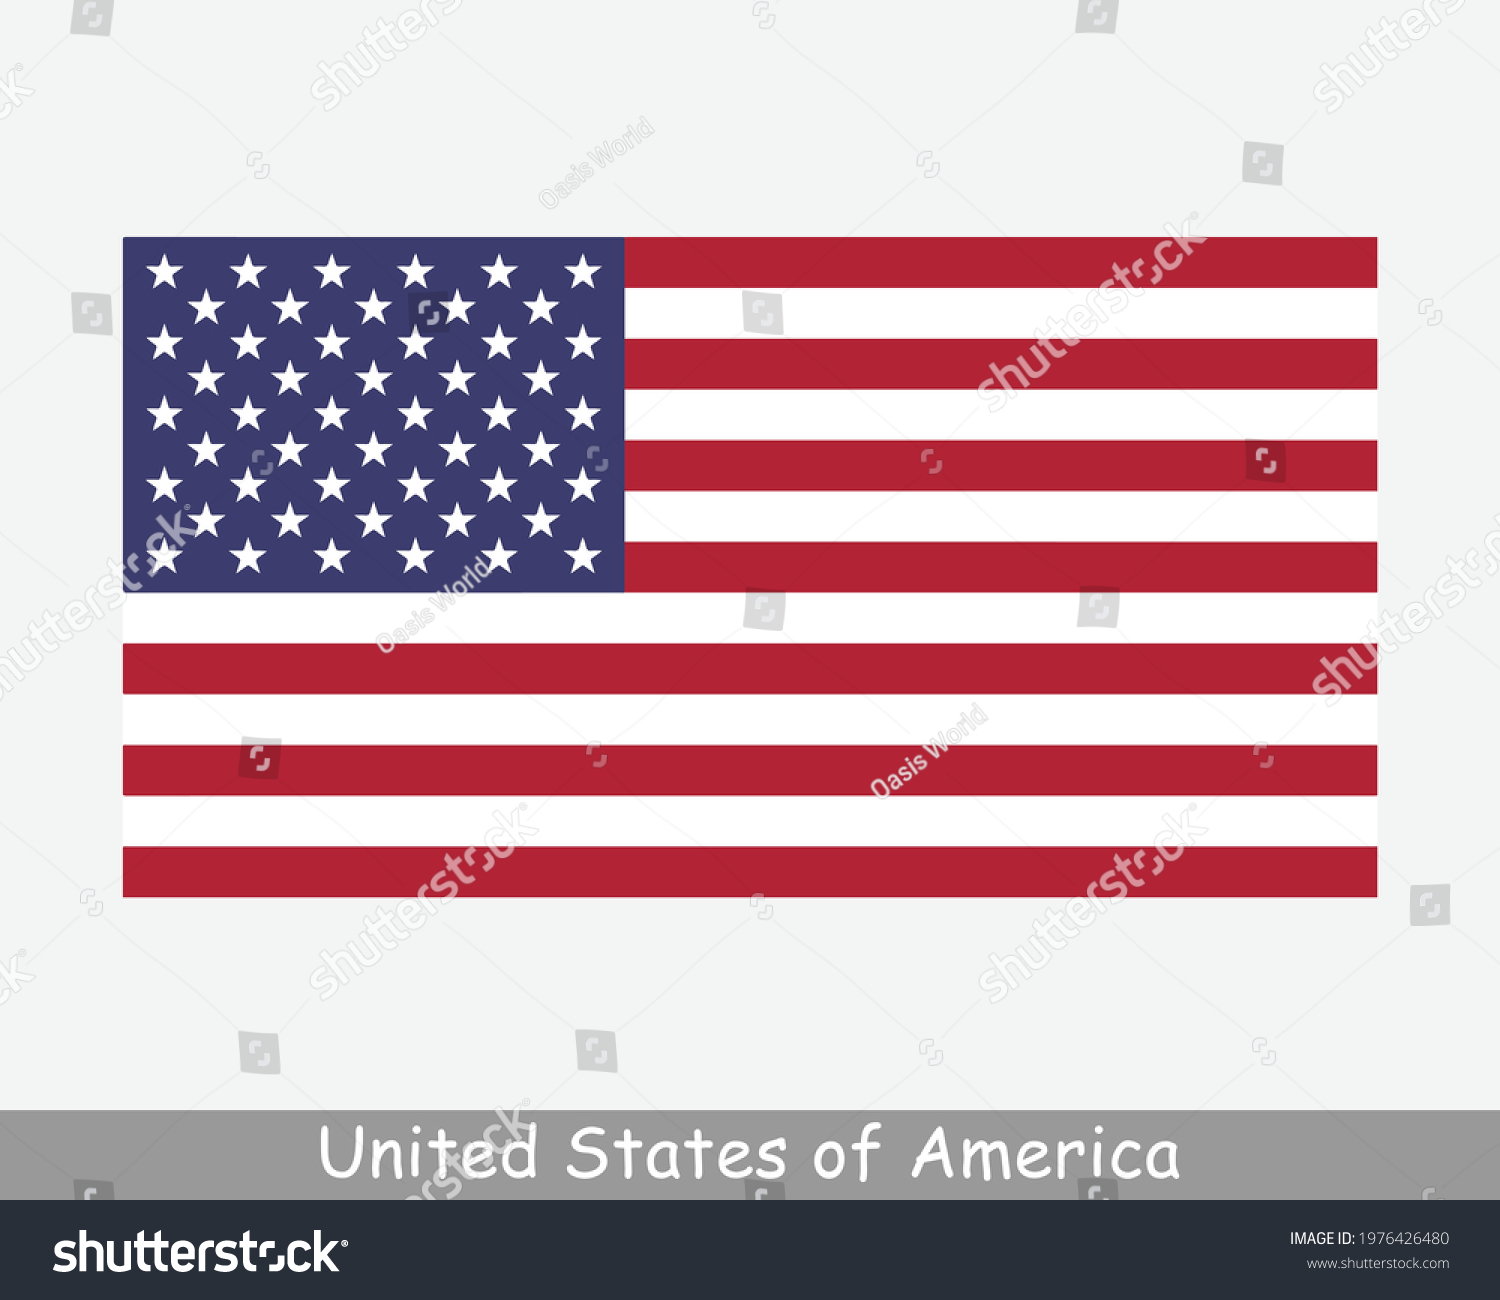 SVG of National Flag of the United States of America. US USA Country Flag. American Detailed Banner. EPS Vector Illustration Cut File svg